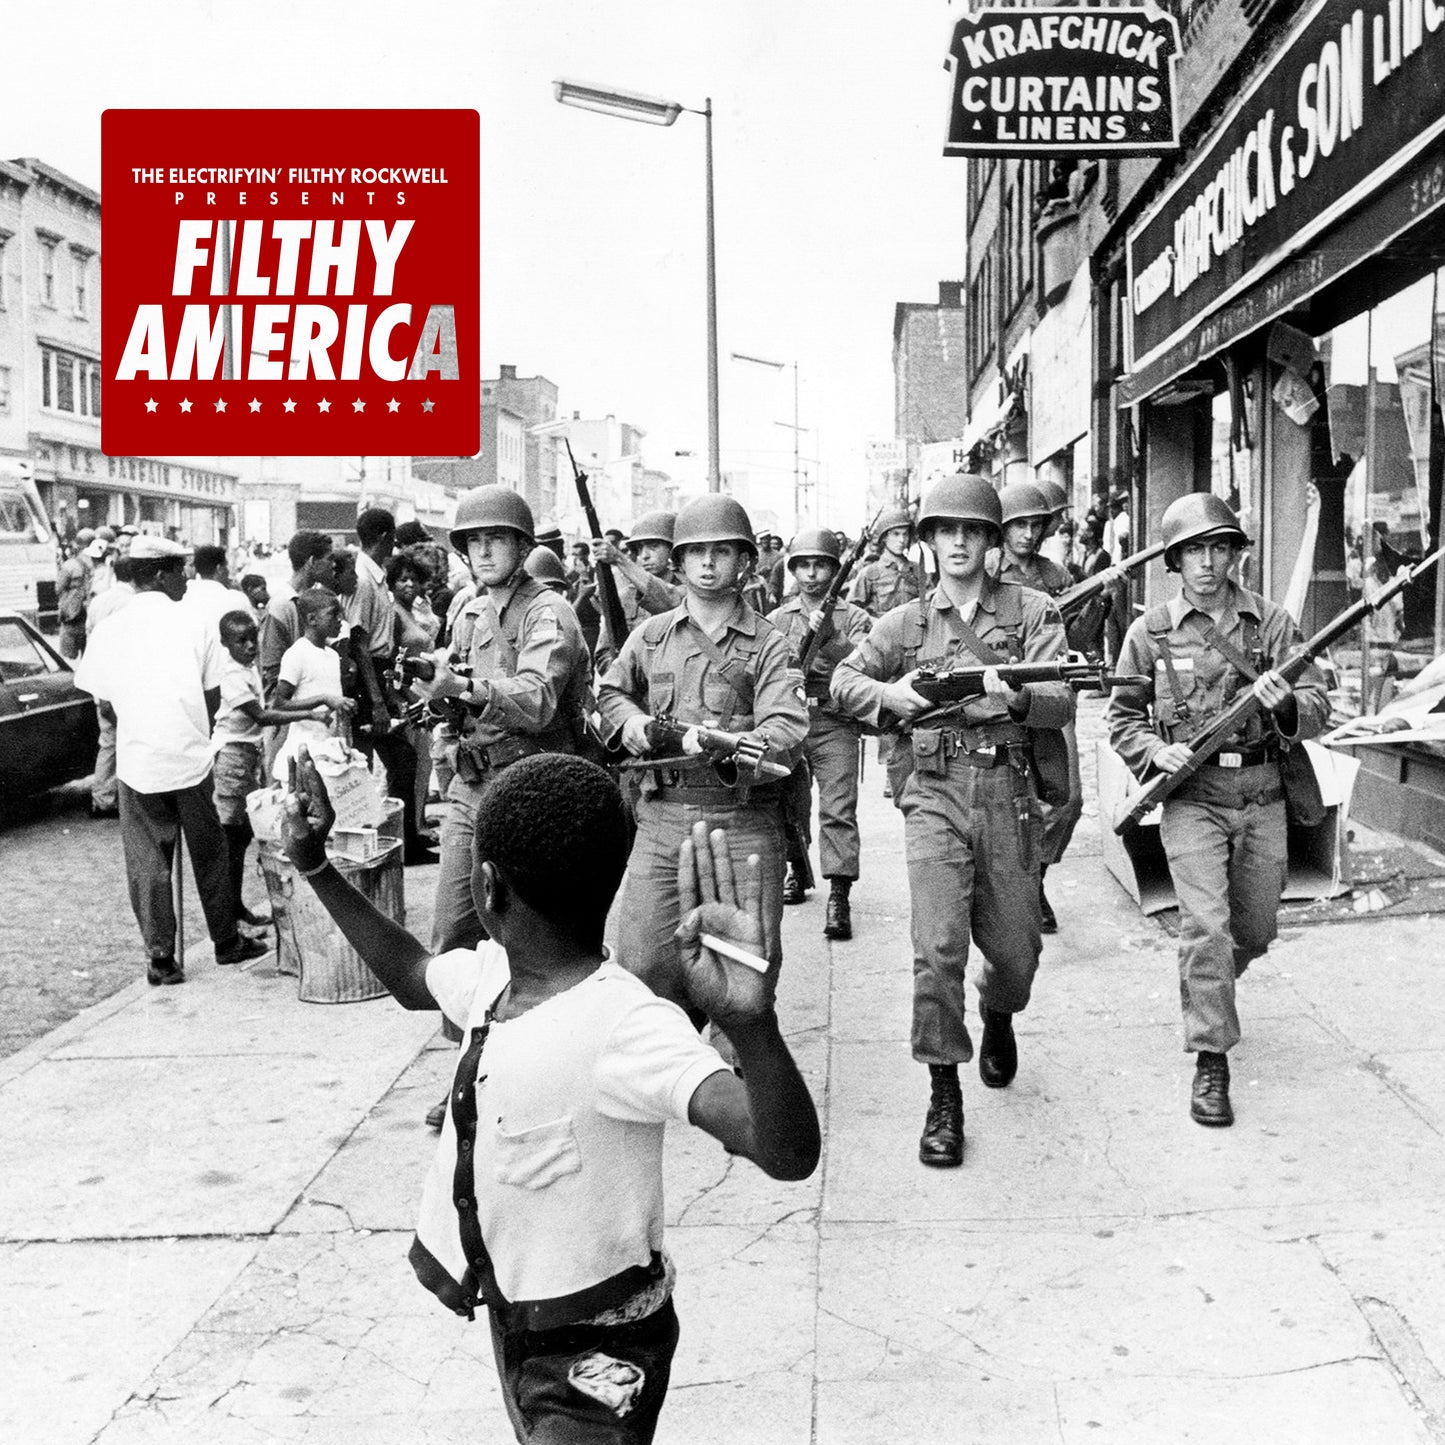 FILTHY AMERICA / DREAMING IN COLOR CD